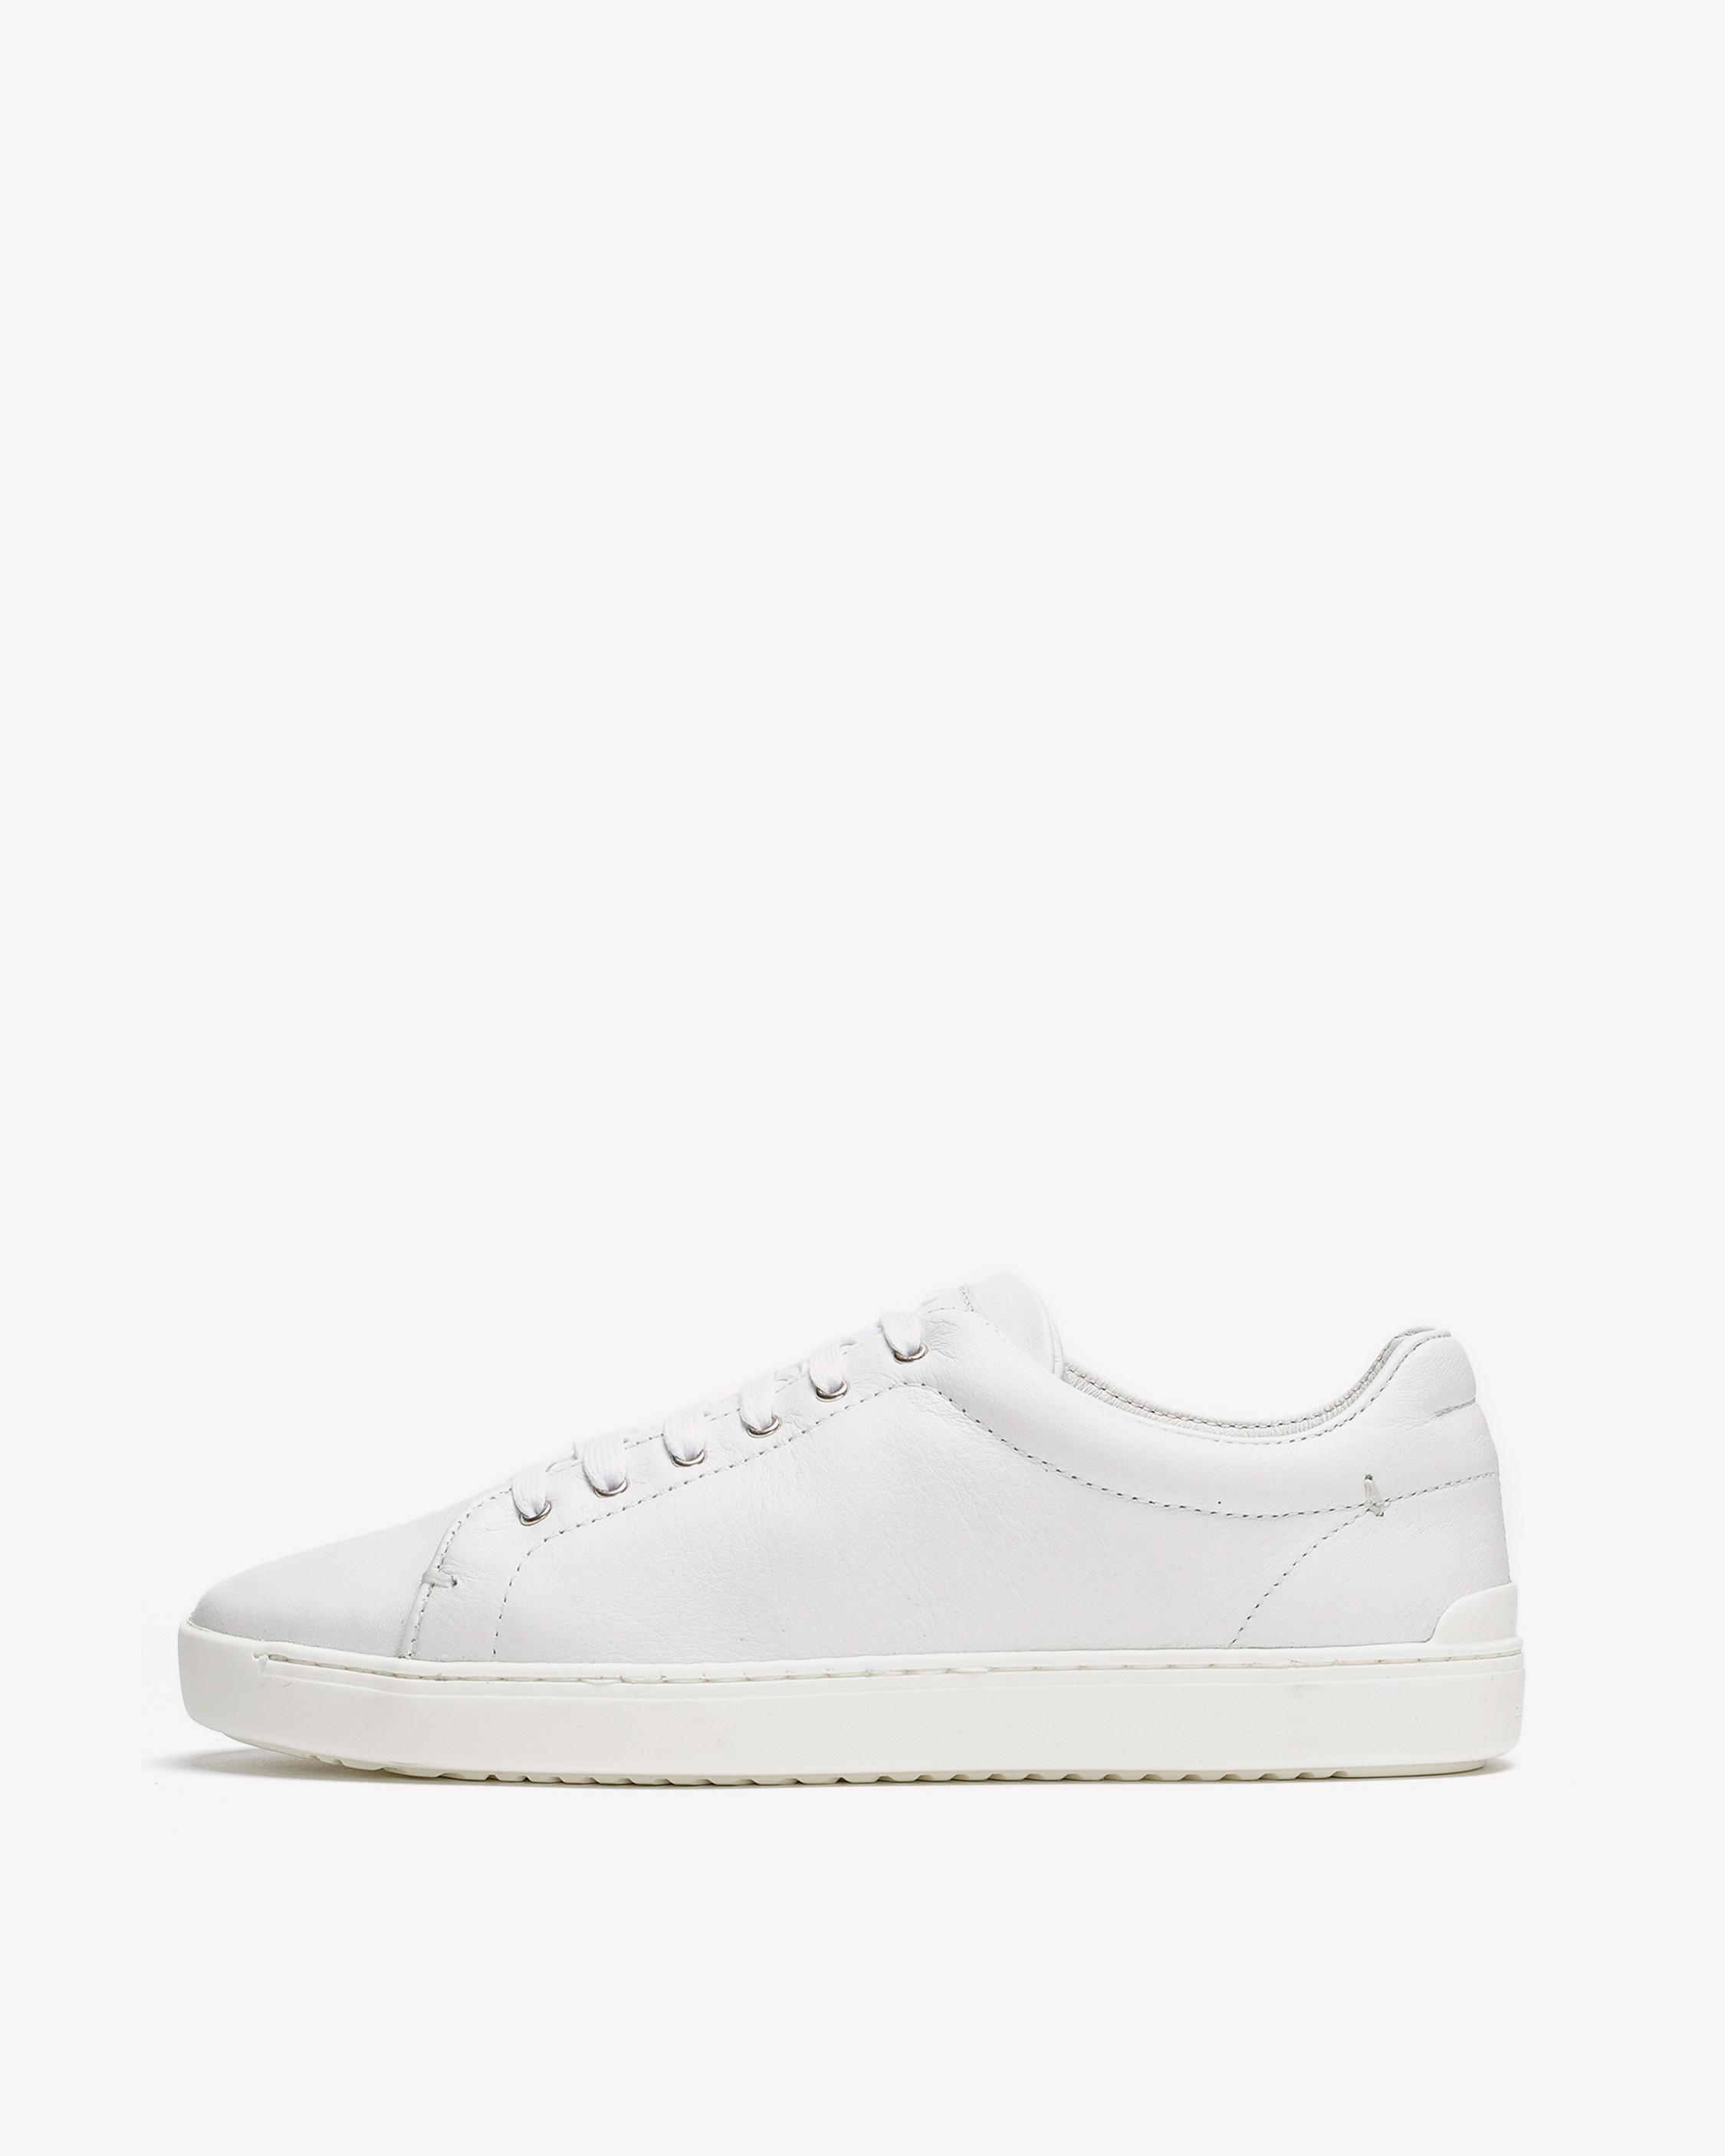 rag and bone kent lace up